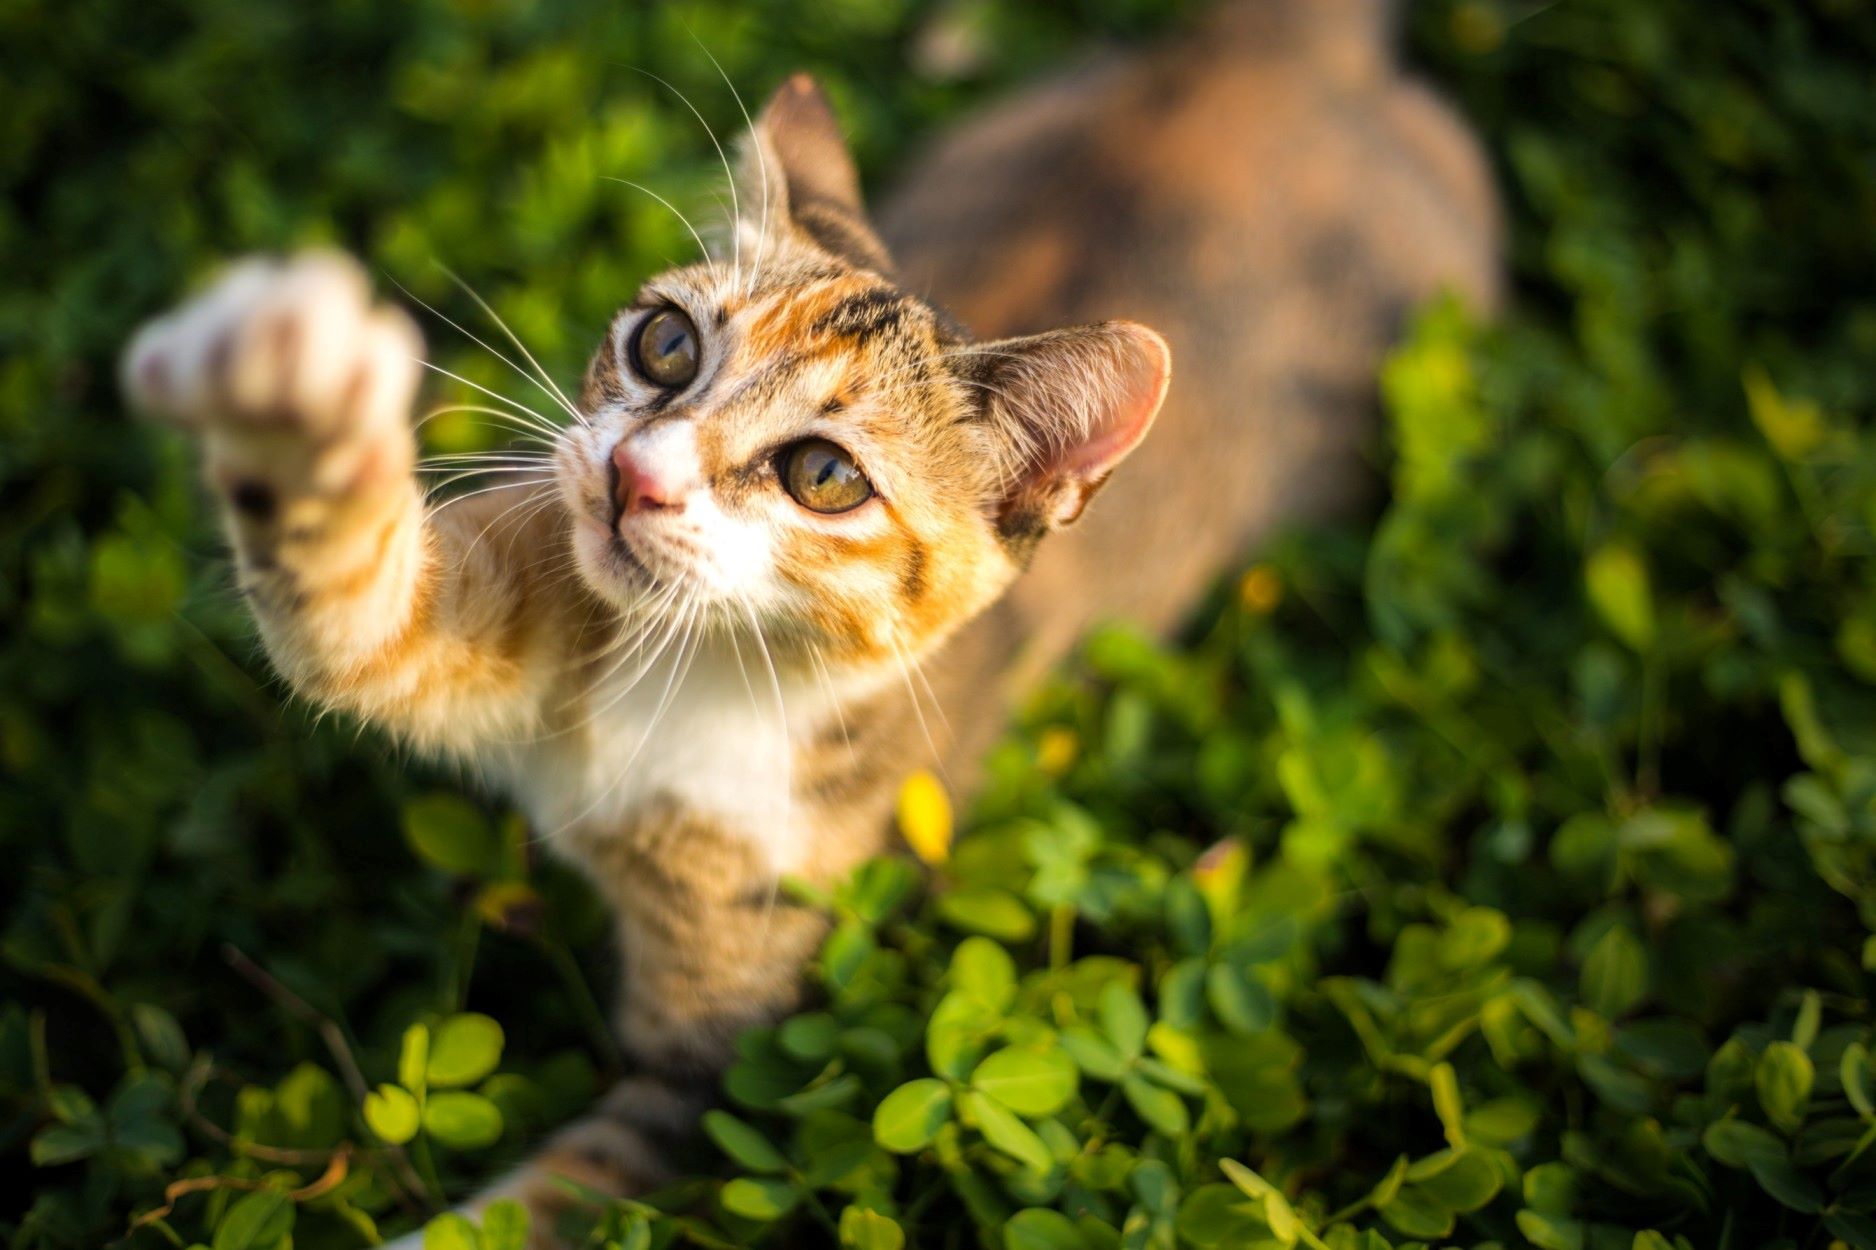 A cat playing outdoors